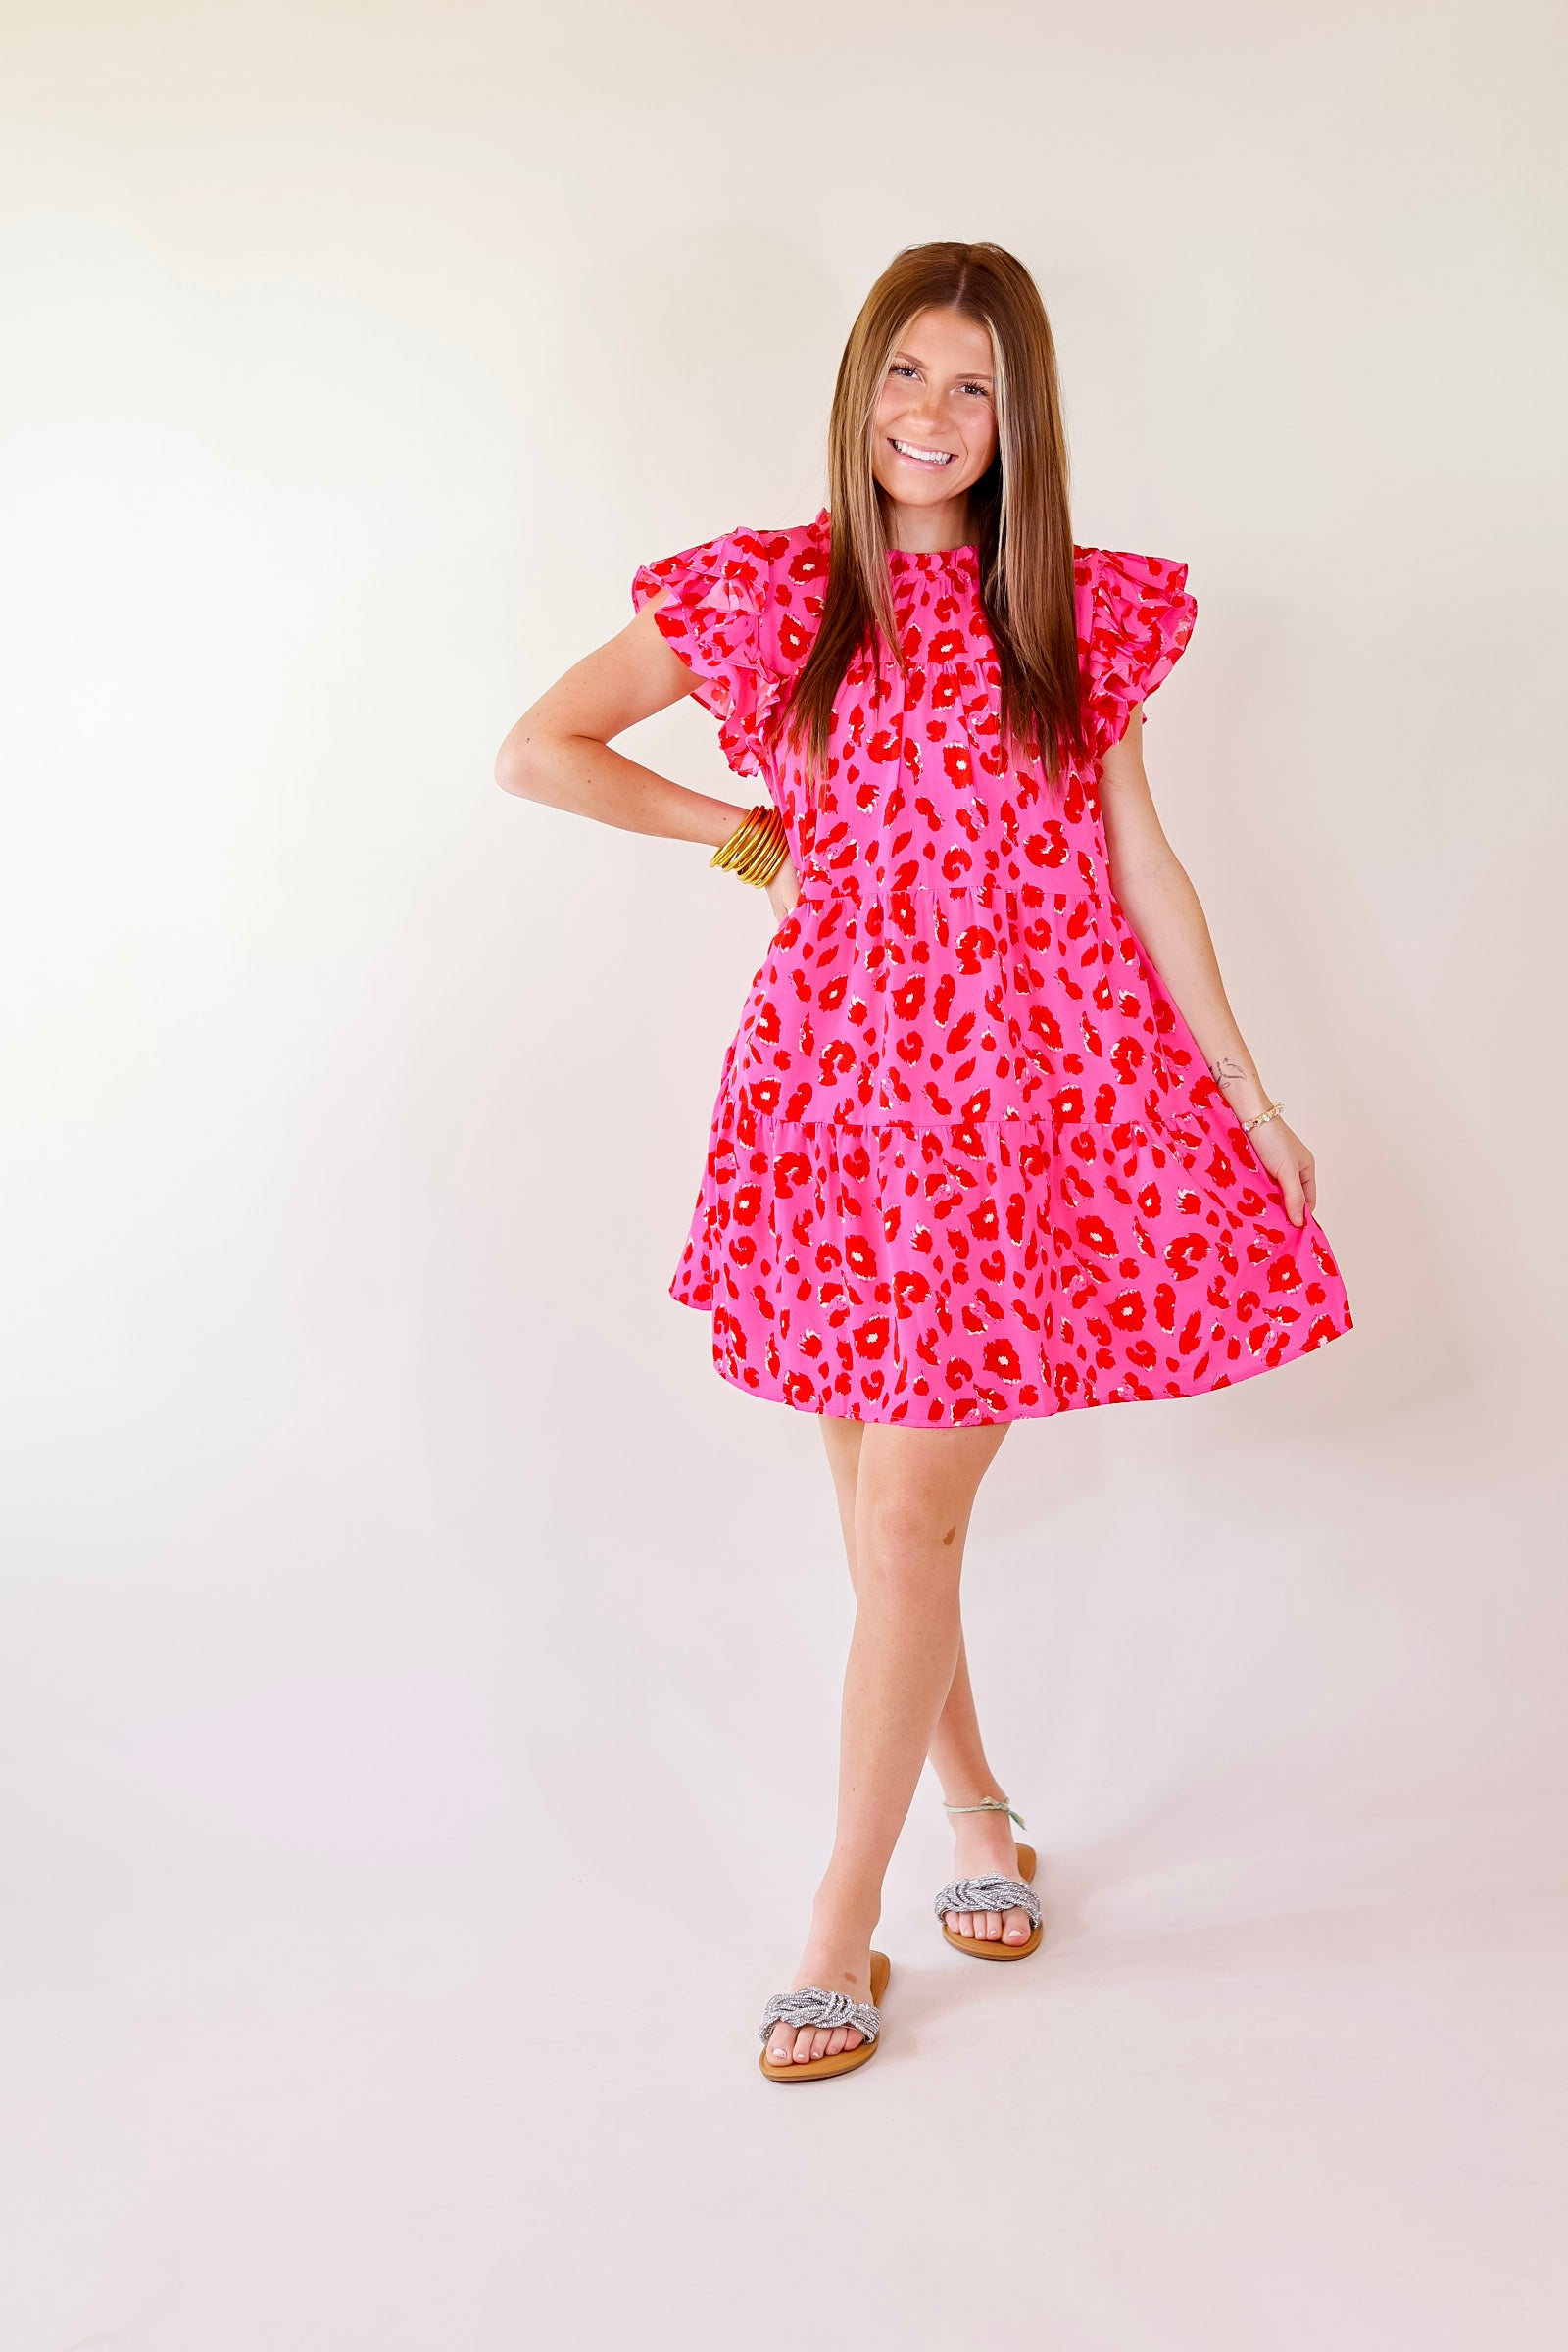 Daring and Delightful Leopard Print Dress with Ruffle Cap Sleeves in Pink - Giddy Up Glamour Boutique